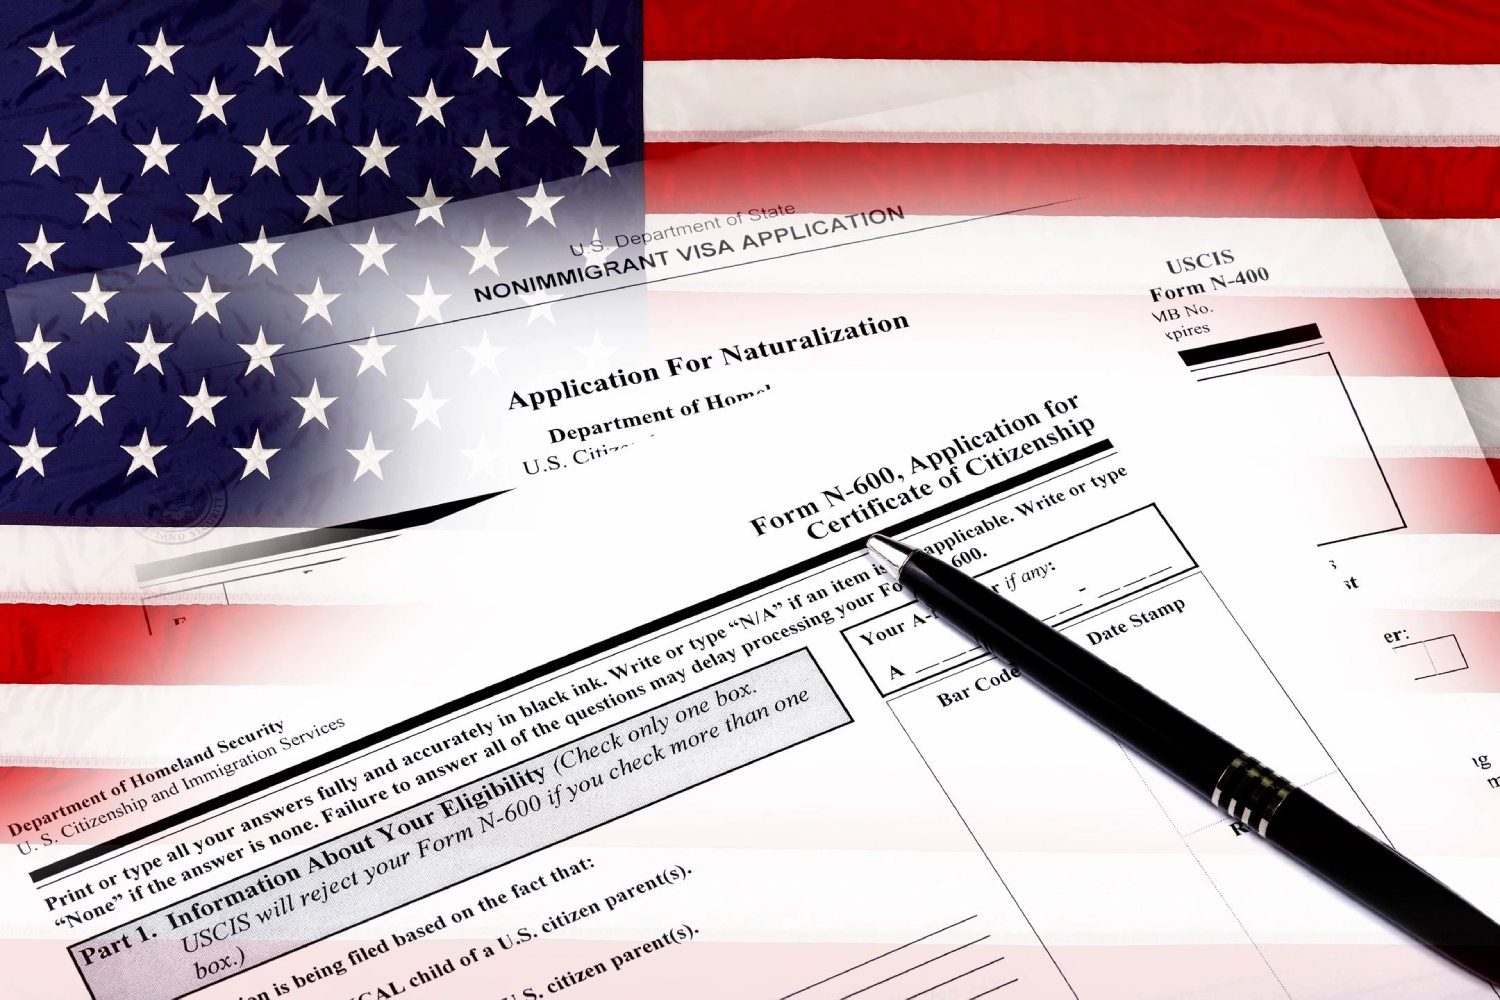 A close up of an application for naturalization